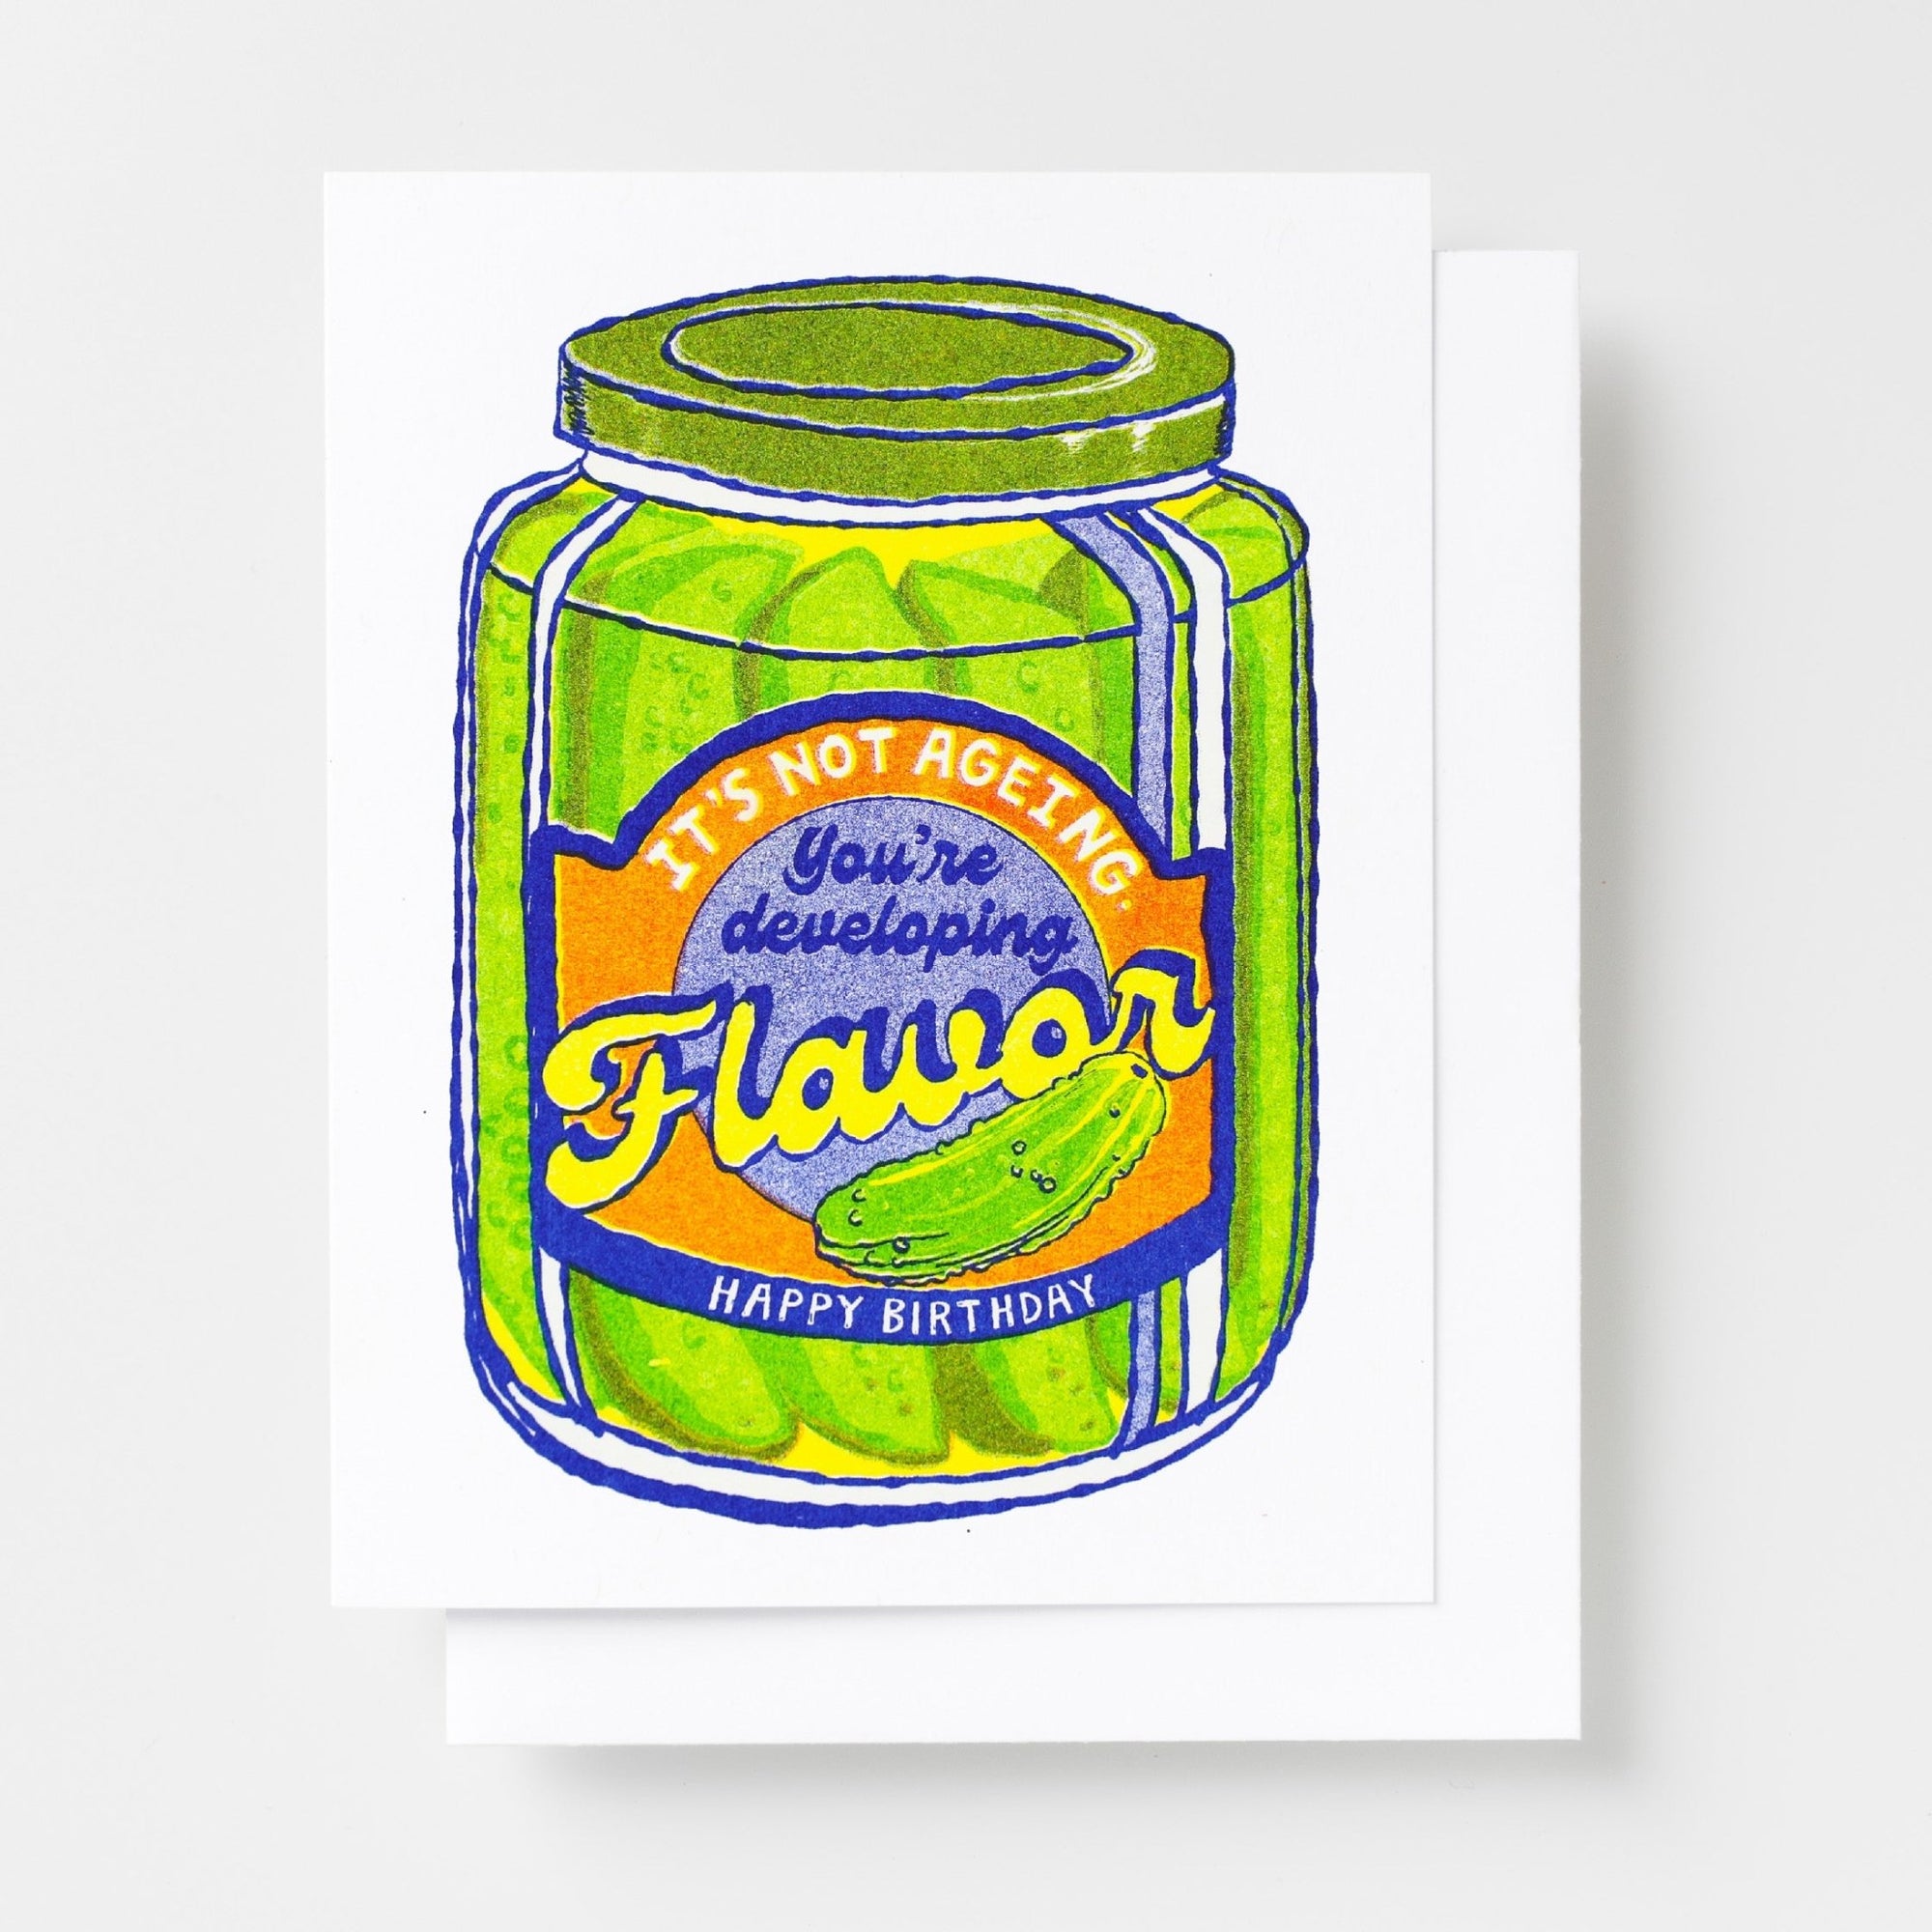 HBD Developing Flavor Risograph Card - Yellow Owl Workshop